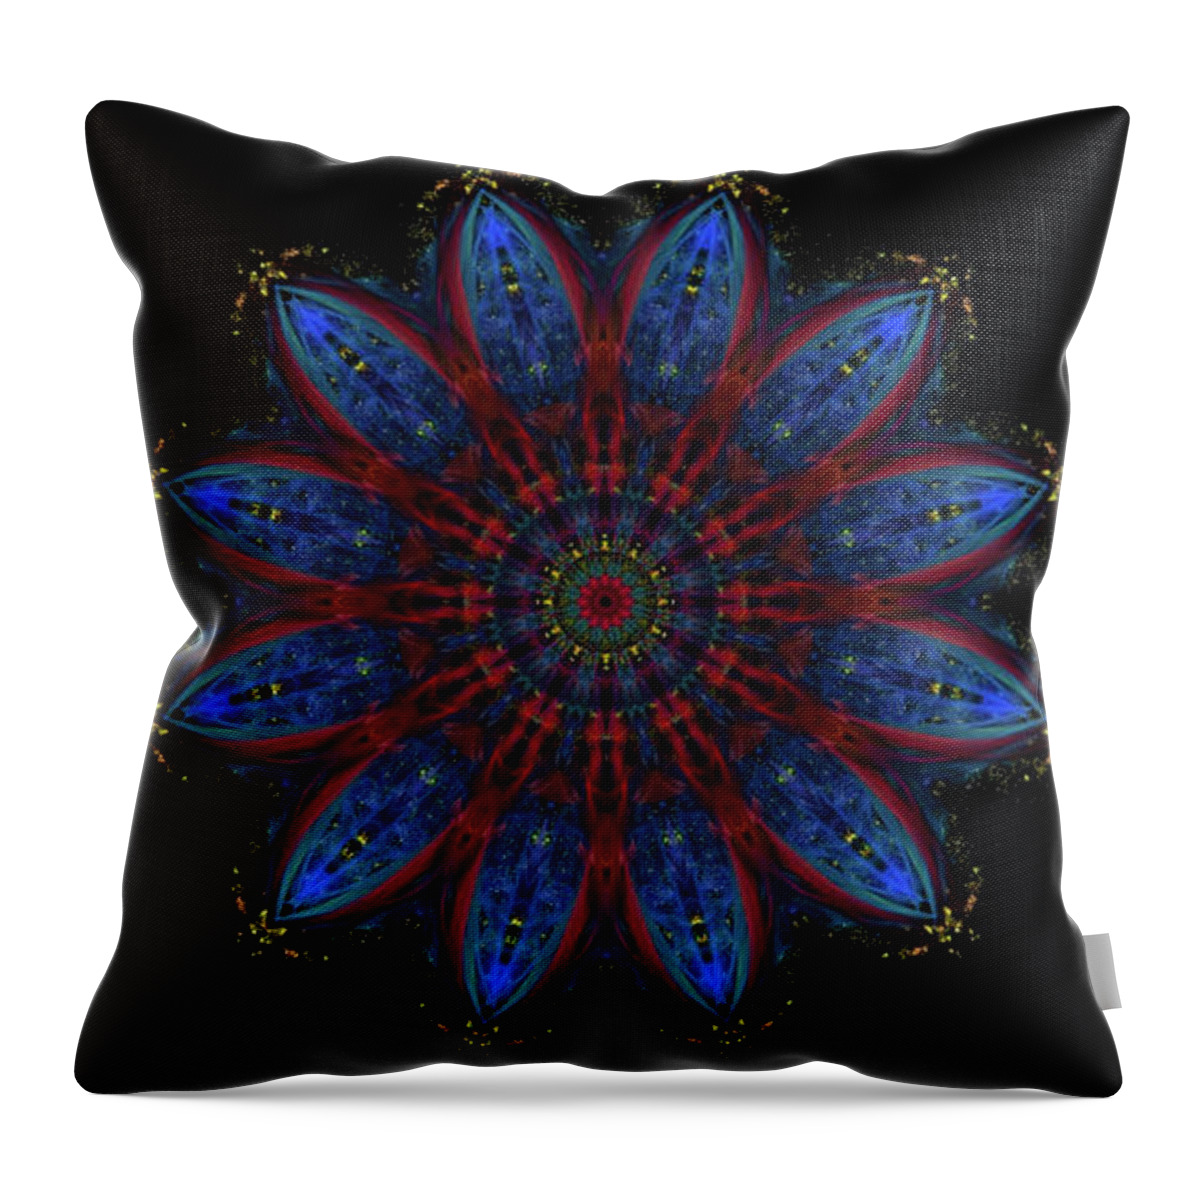 Kosmic Blue Ice Burst Mandala Is A Beautiful And Intricate Design Featuring A Vibrant Blue Palette With A Dazzling Array Of Colors. The Mandala Features A Repeating Pattern Of Circles And Lines Throw Pillow featuring the digital art Kosmic Blue Ice Burst Mandala by Michael Canteen